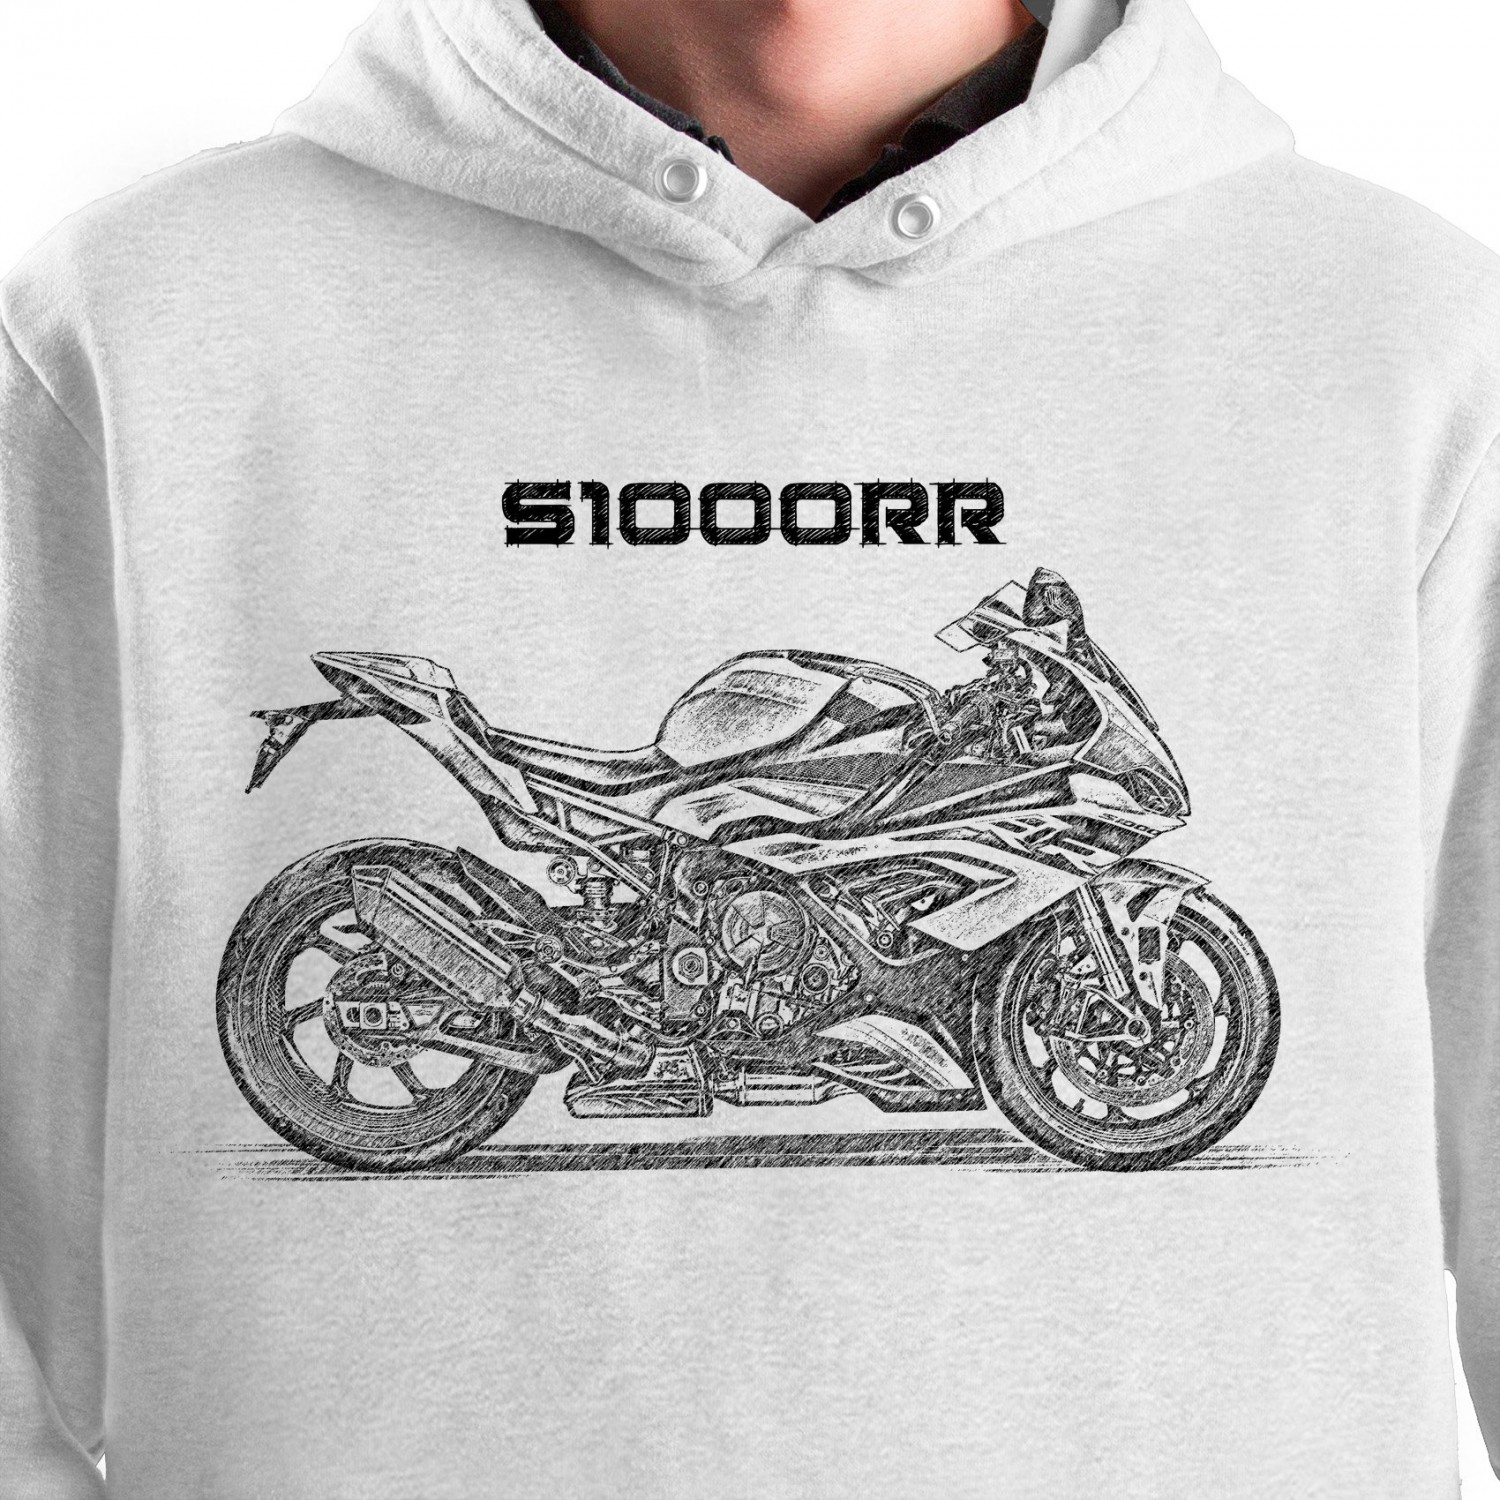 White T-shirt with BMW S1000RR . Gift for motorcyclist.